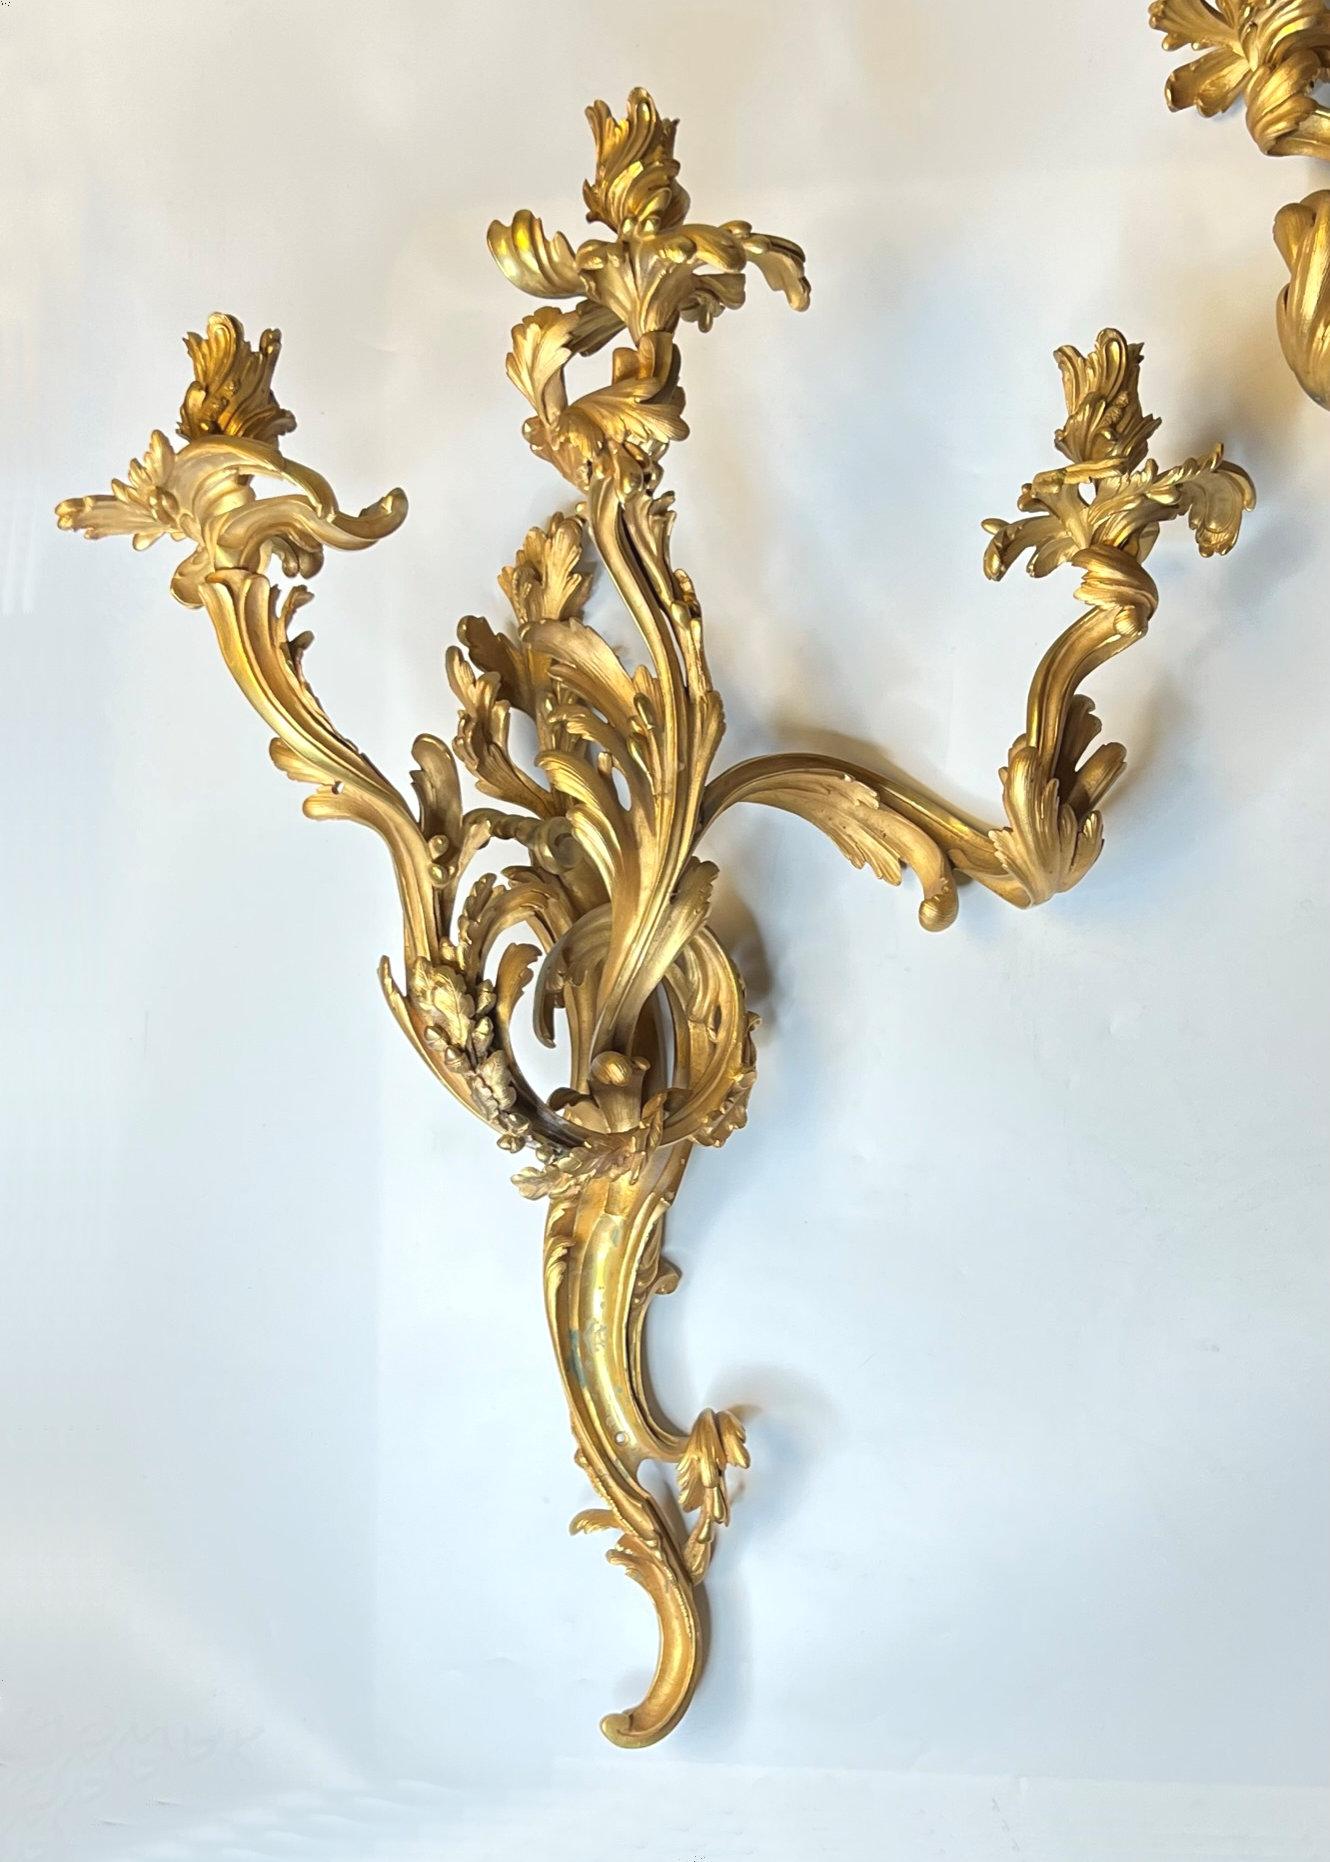 Our very large pair of gilt bronze three-light sconces in the Louis XV rococo style measure 30 inches (76 cm) tall and are in very good condition. Drilled for electrification. We may add sockets and wiring for a modest fee.